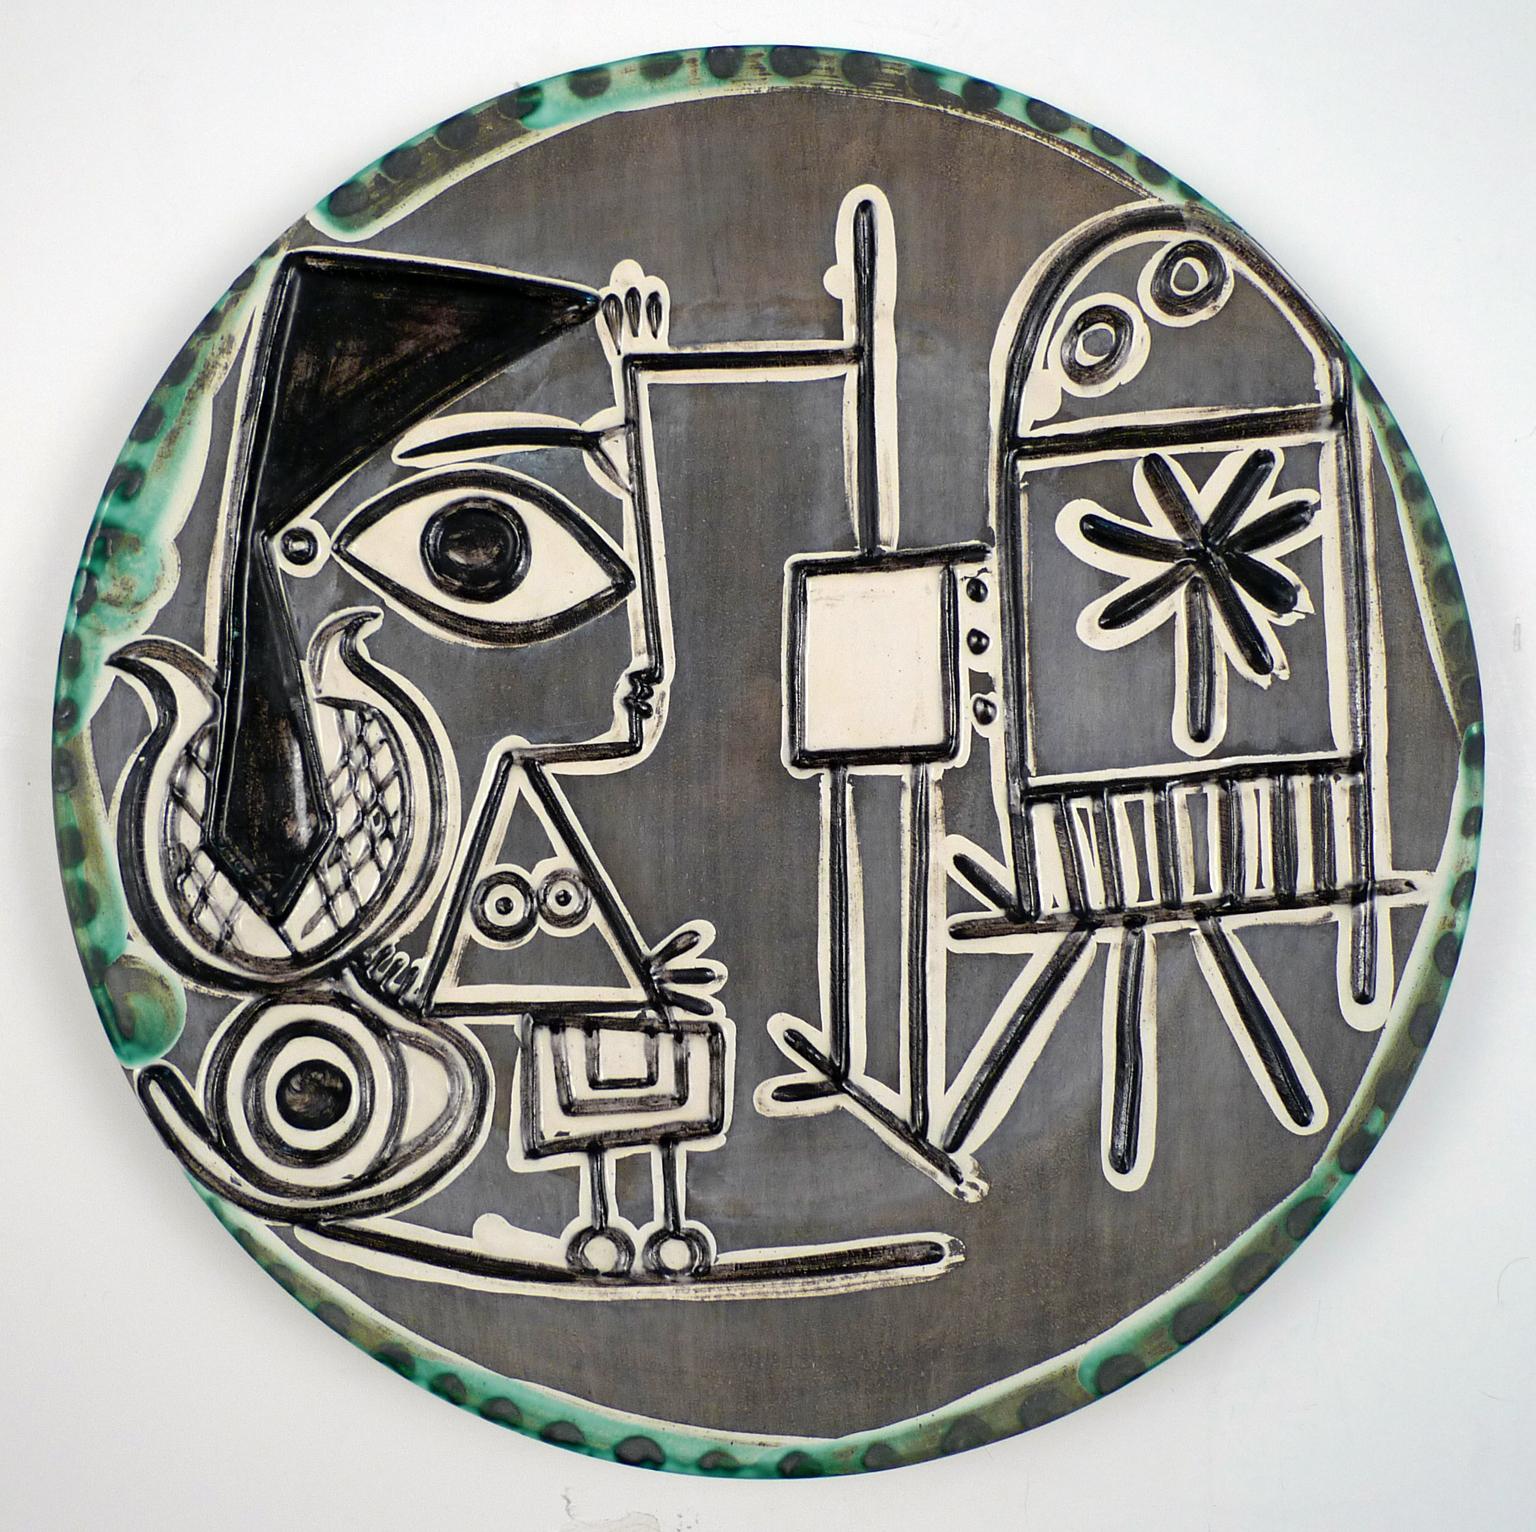 Jacqueline au Chevalet, 1956. Ceramic Dish Stamped Madoura Plein Feu by Picasso - Art by Pablo Picasso